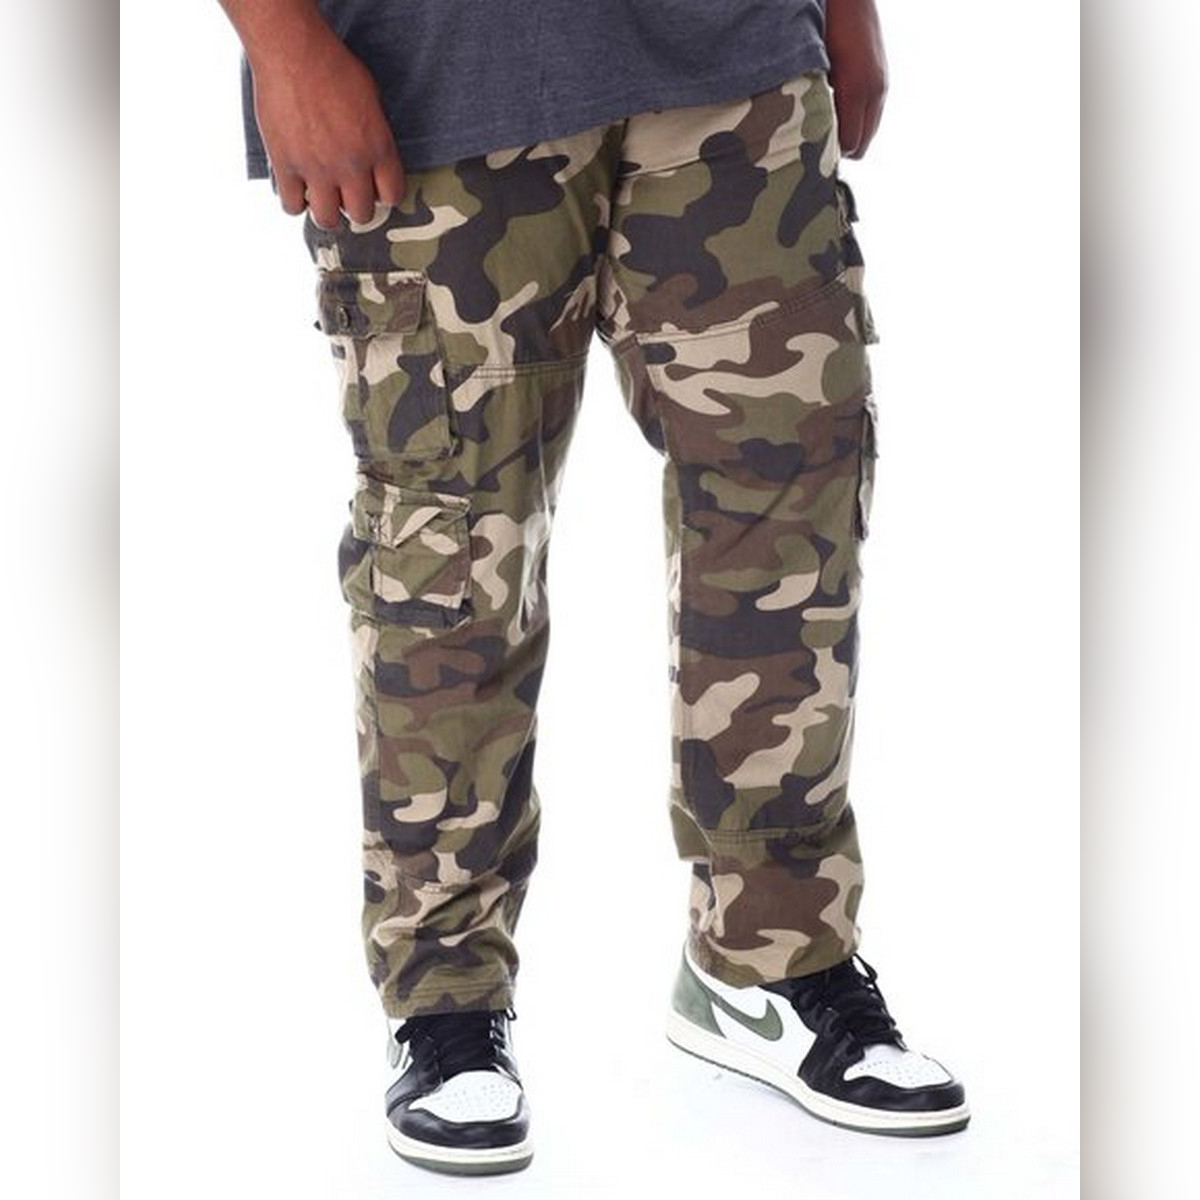 Hashback Camouflage 10 Pocket Cargo Pant Price in Pakistan  View Latest  Collection of Cargo Shorts